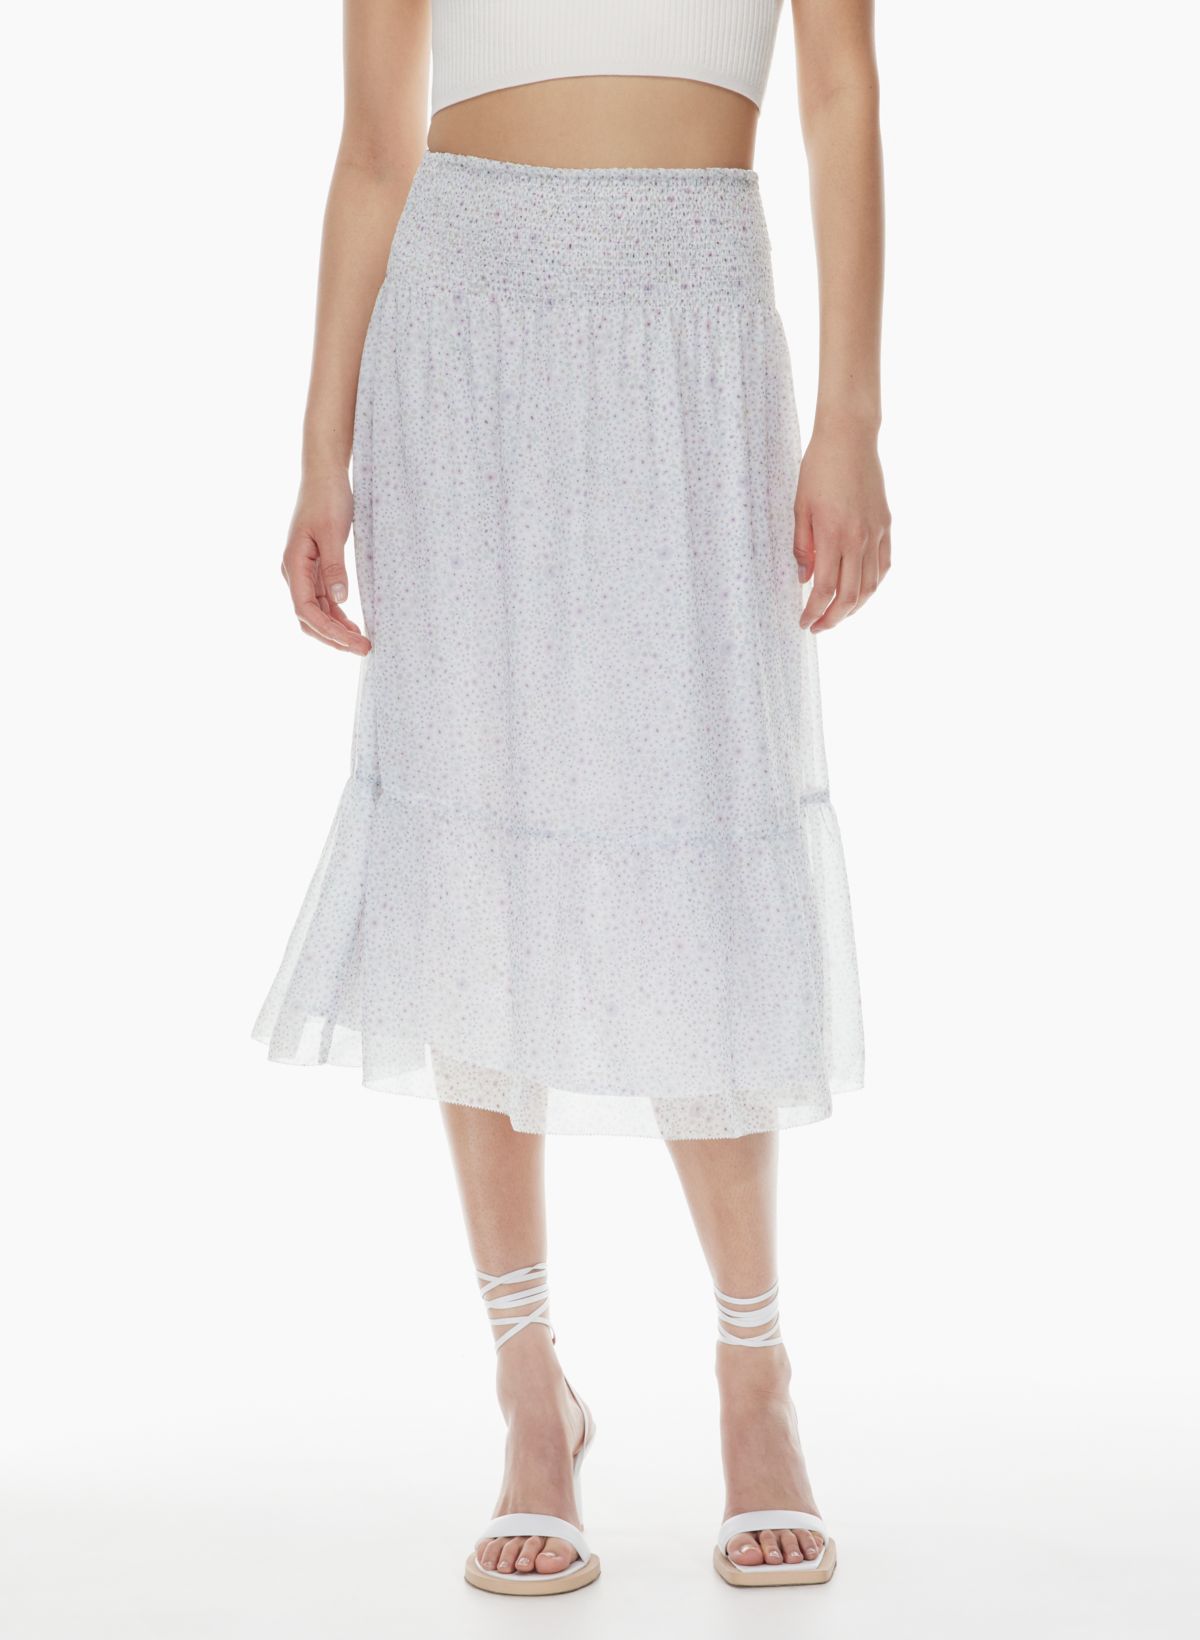 Waterfall Feather Skirt - White L